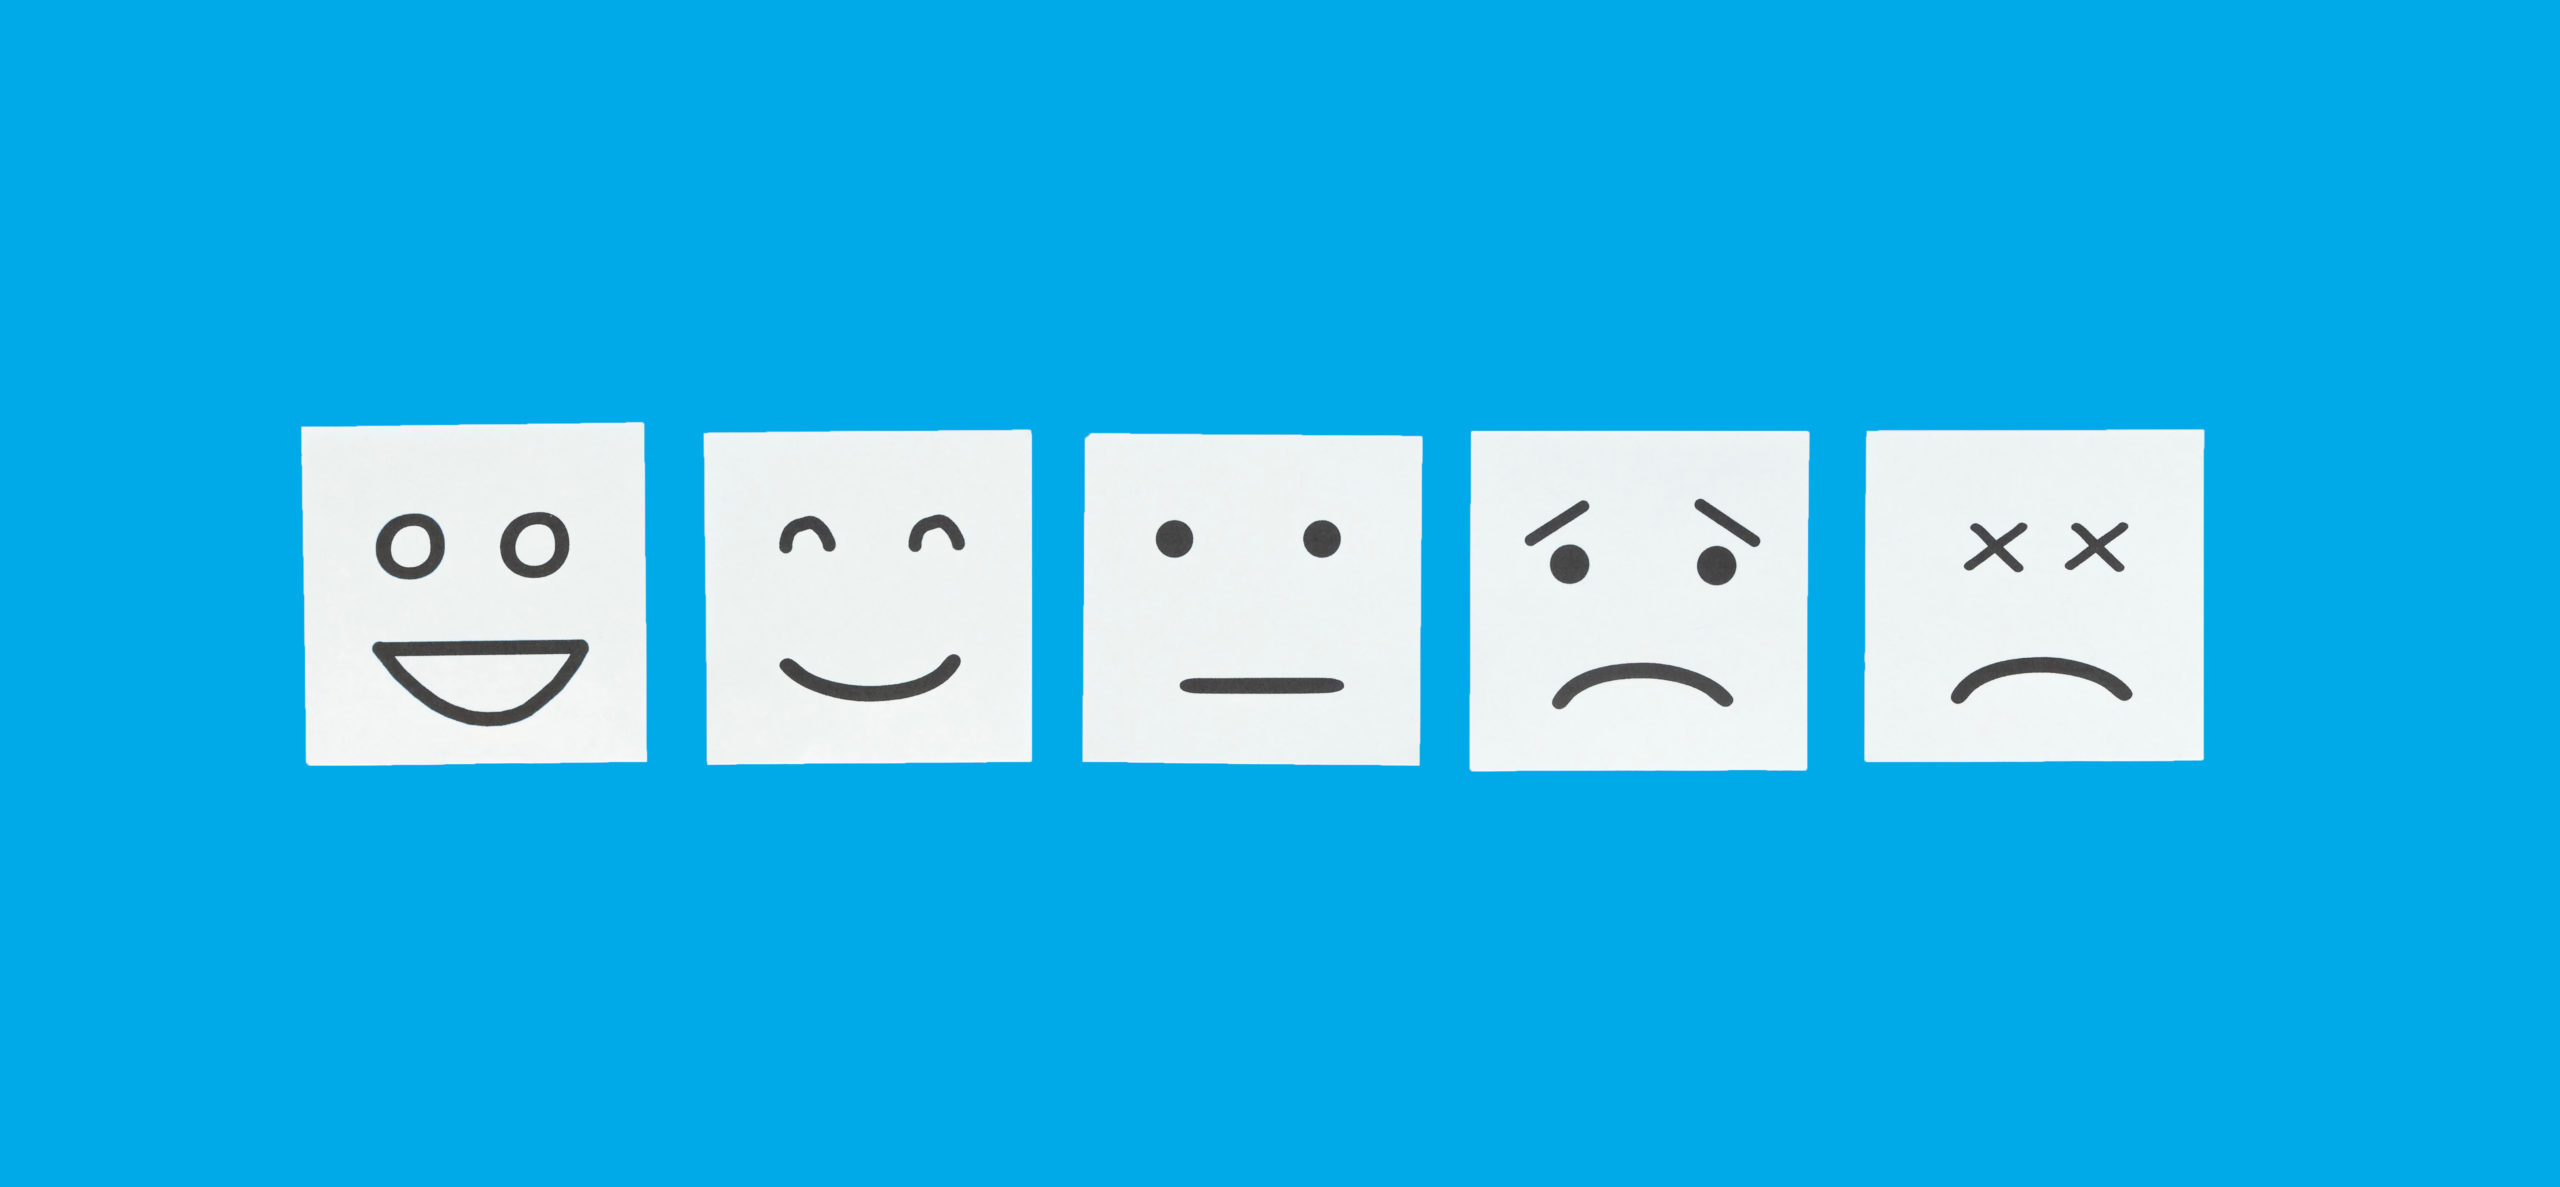 5 sticky notes, each displays an emotion. from left to right: Overjoyed, happy, neutral, sad, scared. Each one reflects an emotion that an LED display could potentially provoke